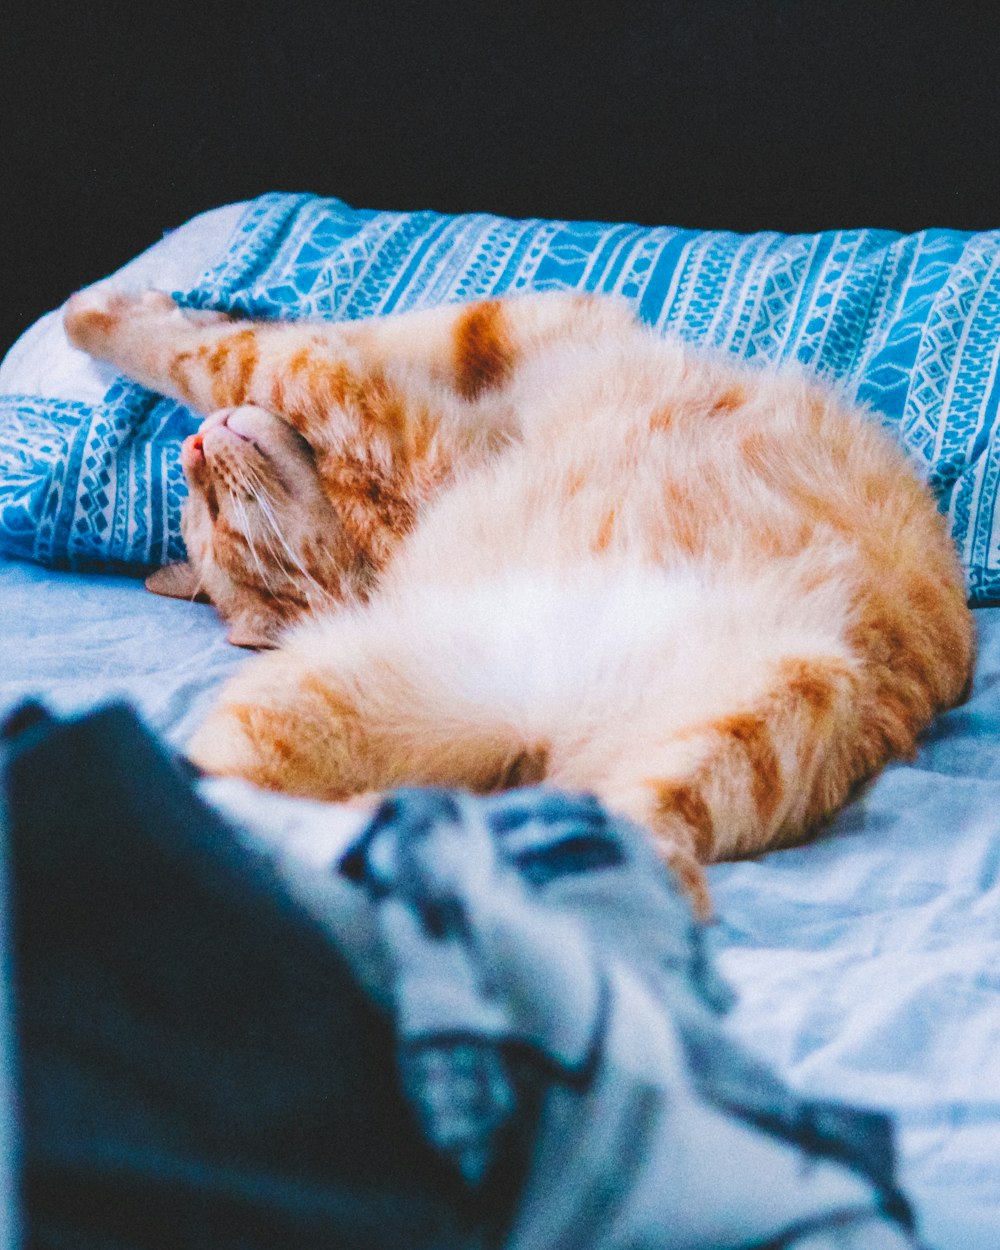 orange tabby cat lying on blue and white textile